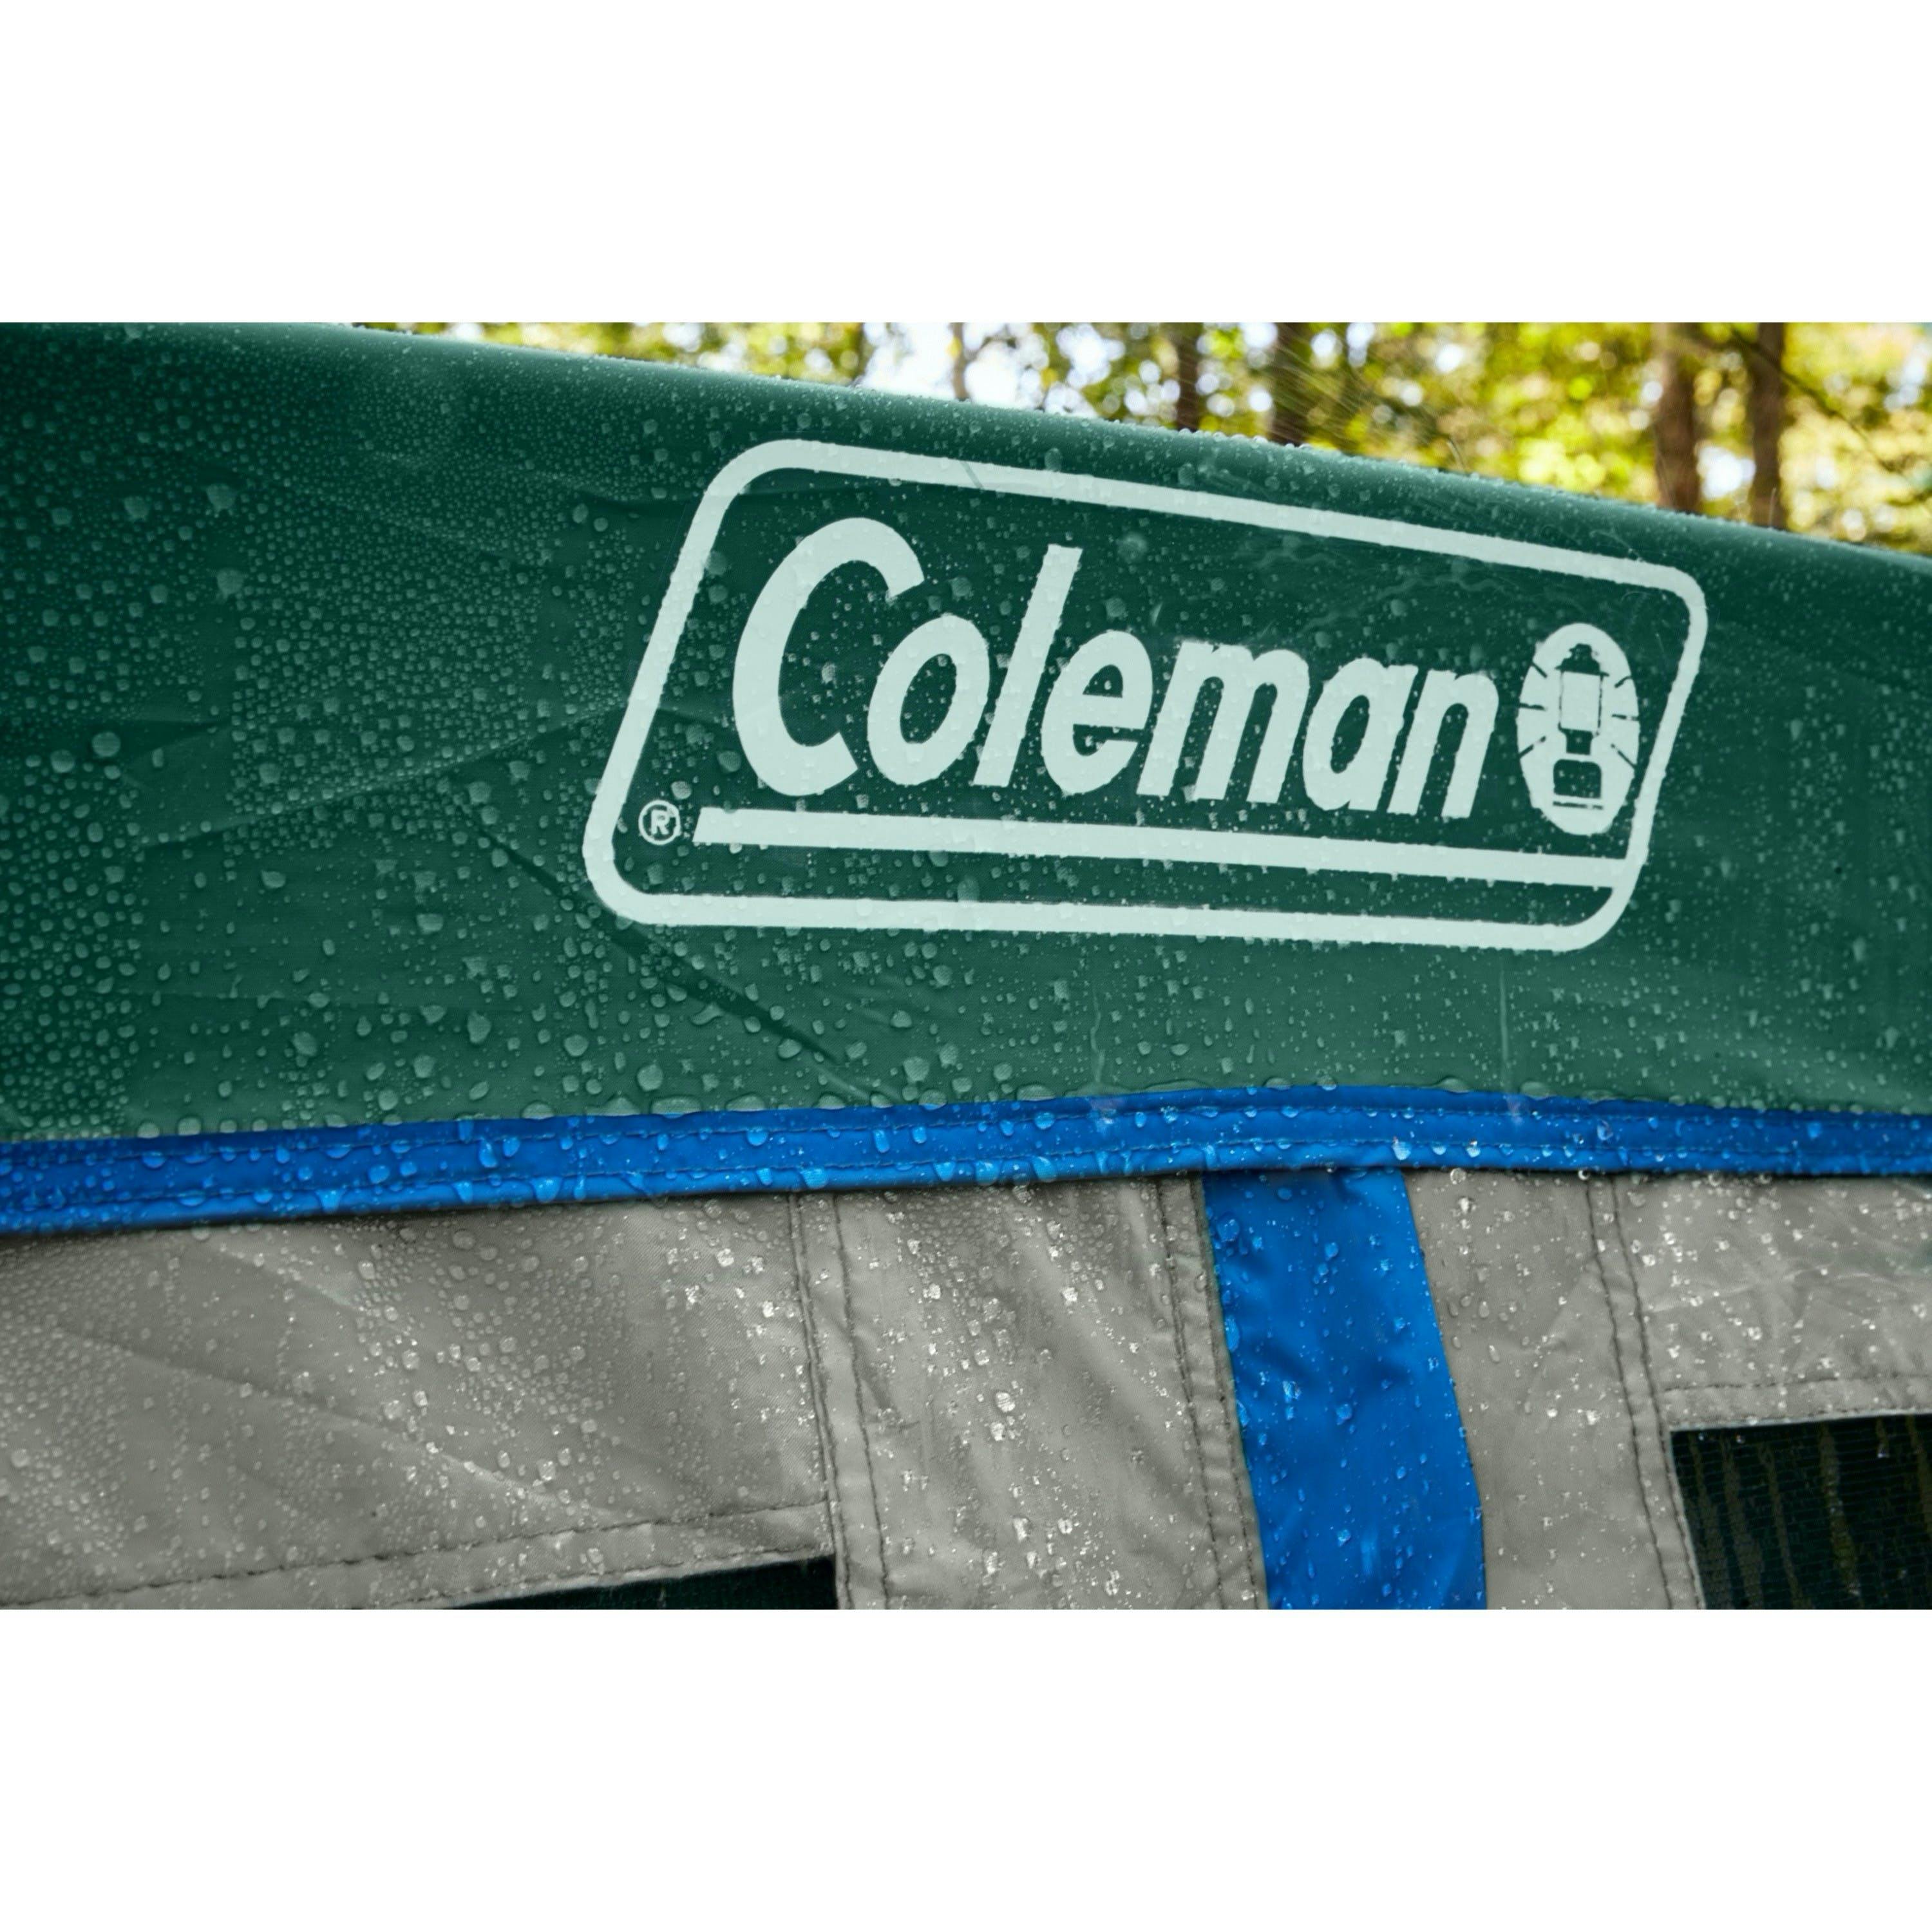 Coleman Skylodge Camping Tent with Screen Room